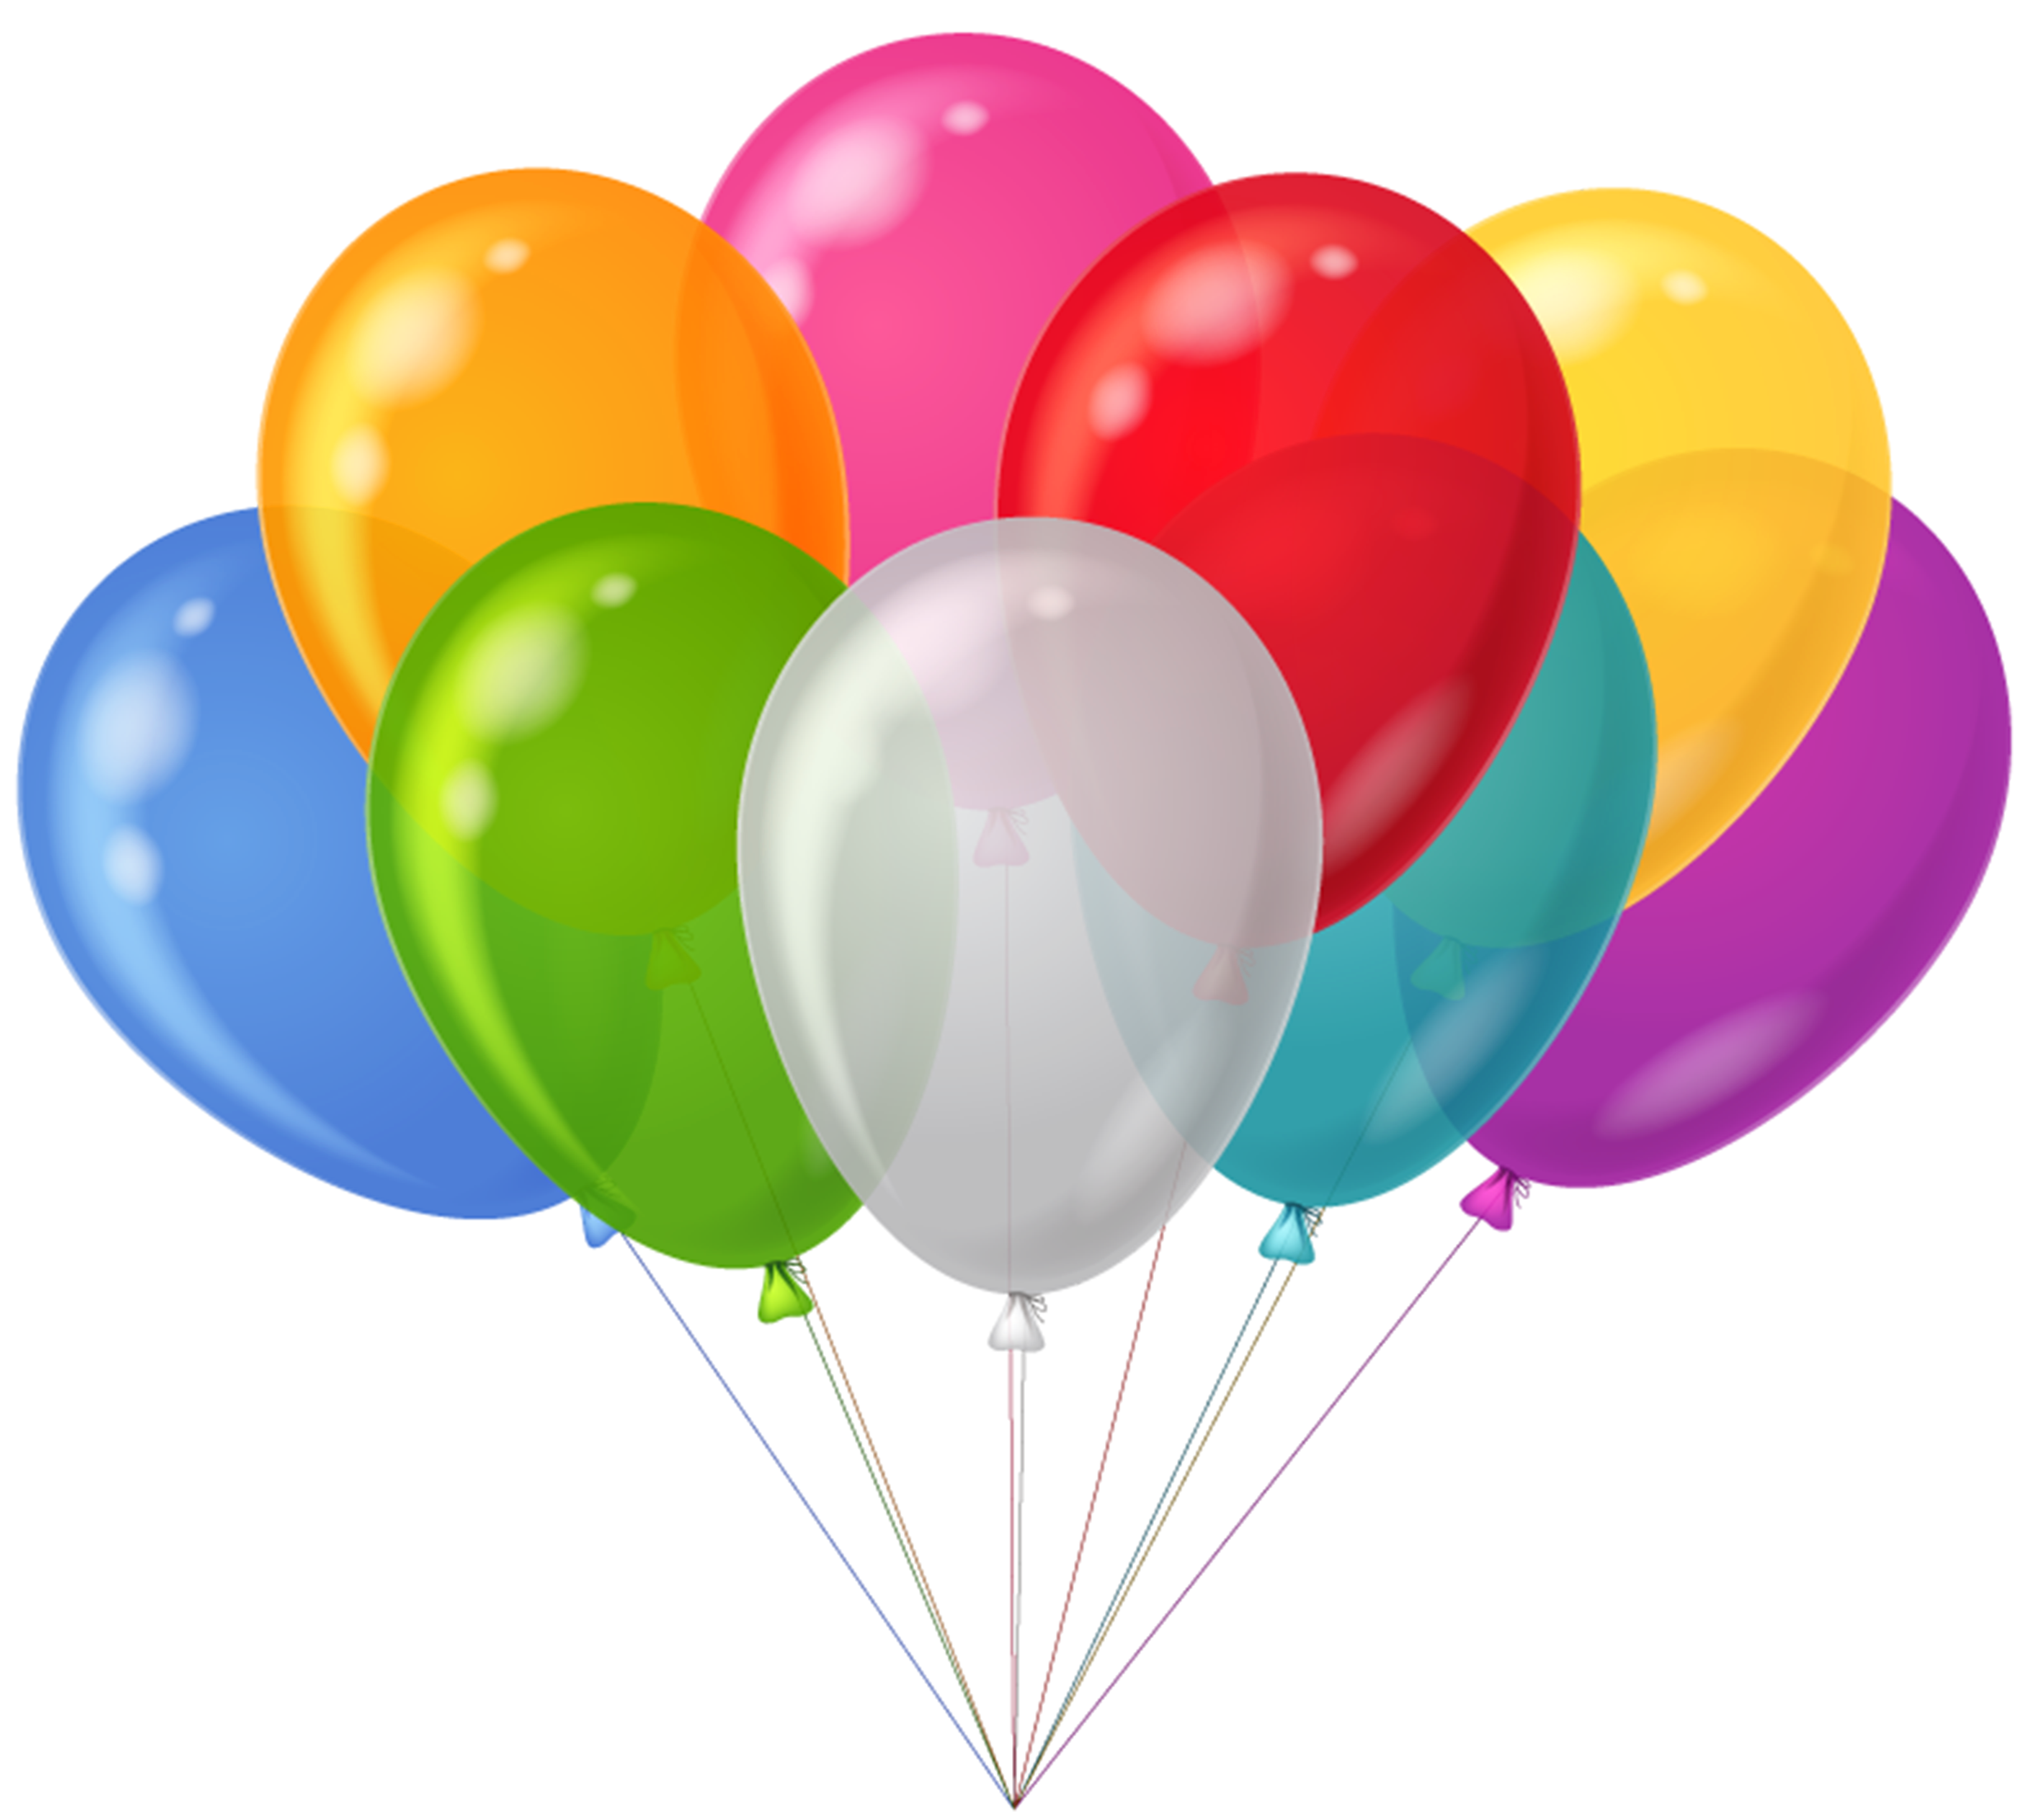 Balloon Images Free - ClipArt Best